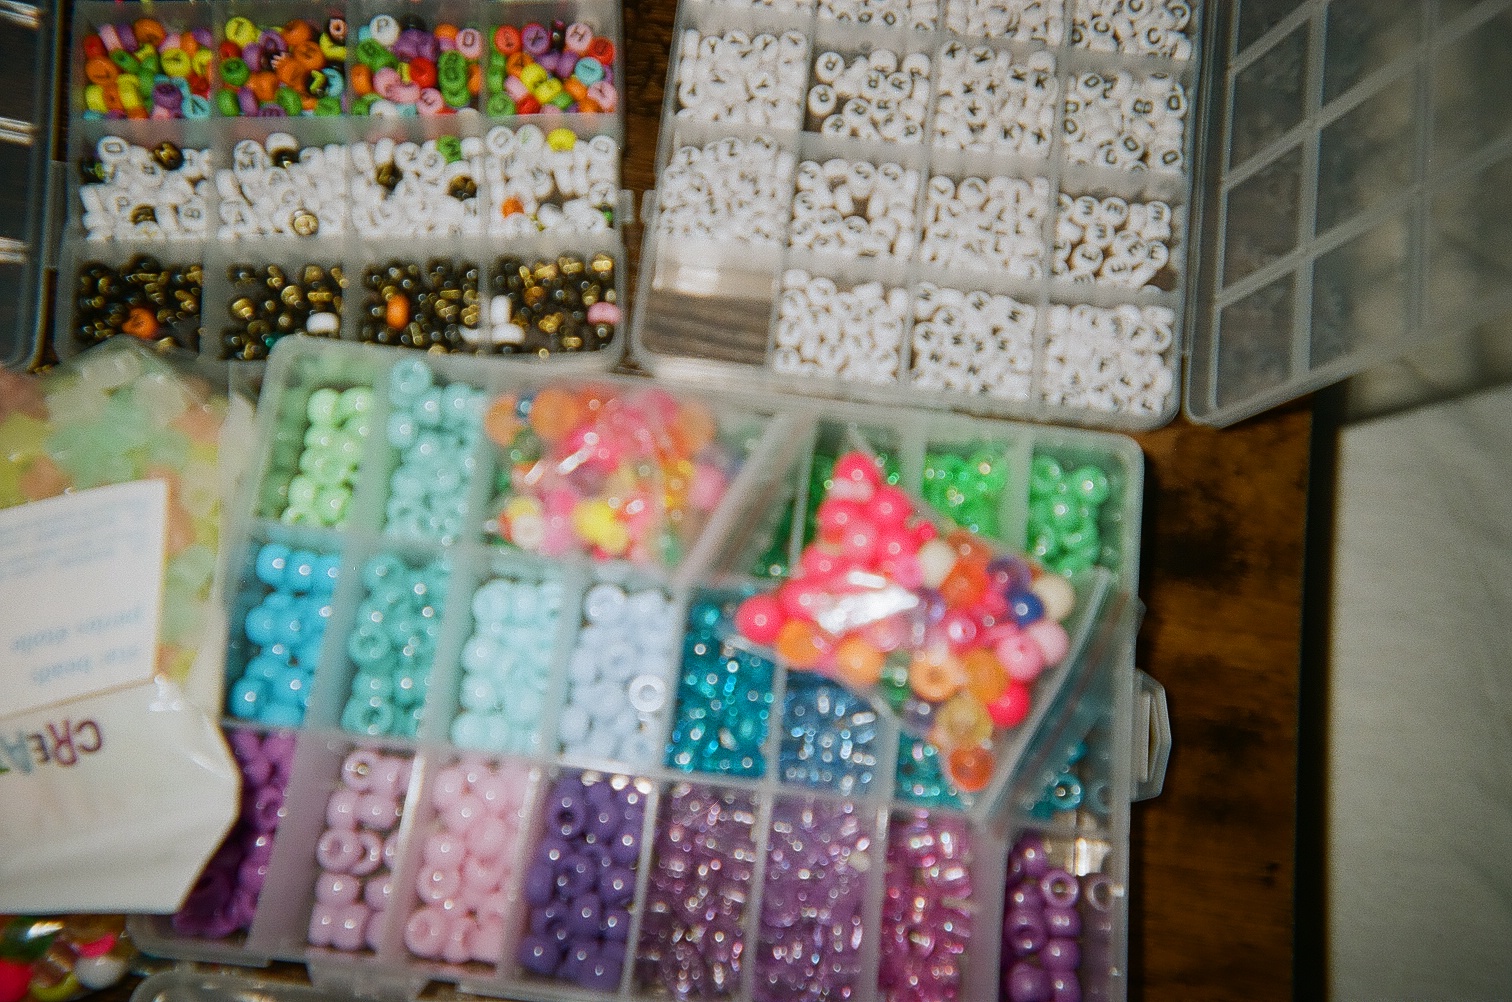 Three boxes of colorful beads and letter beads on top of a table.